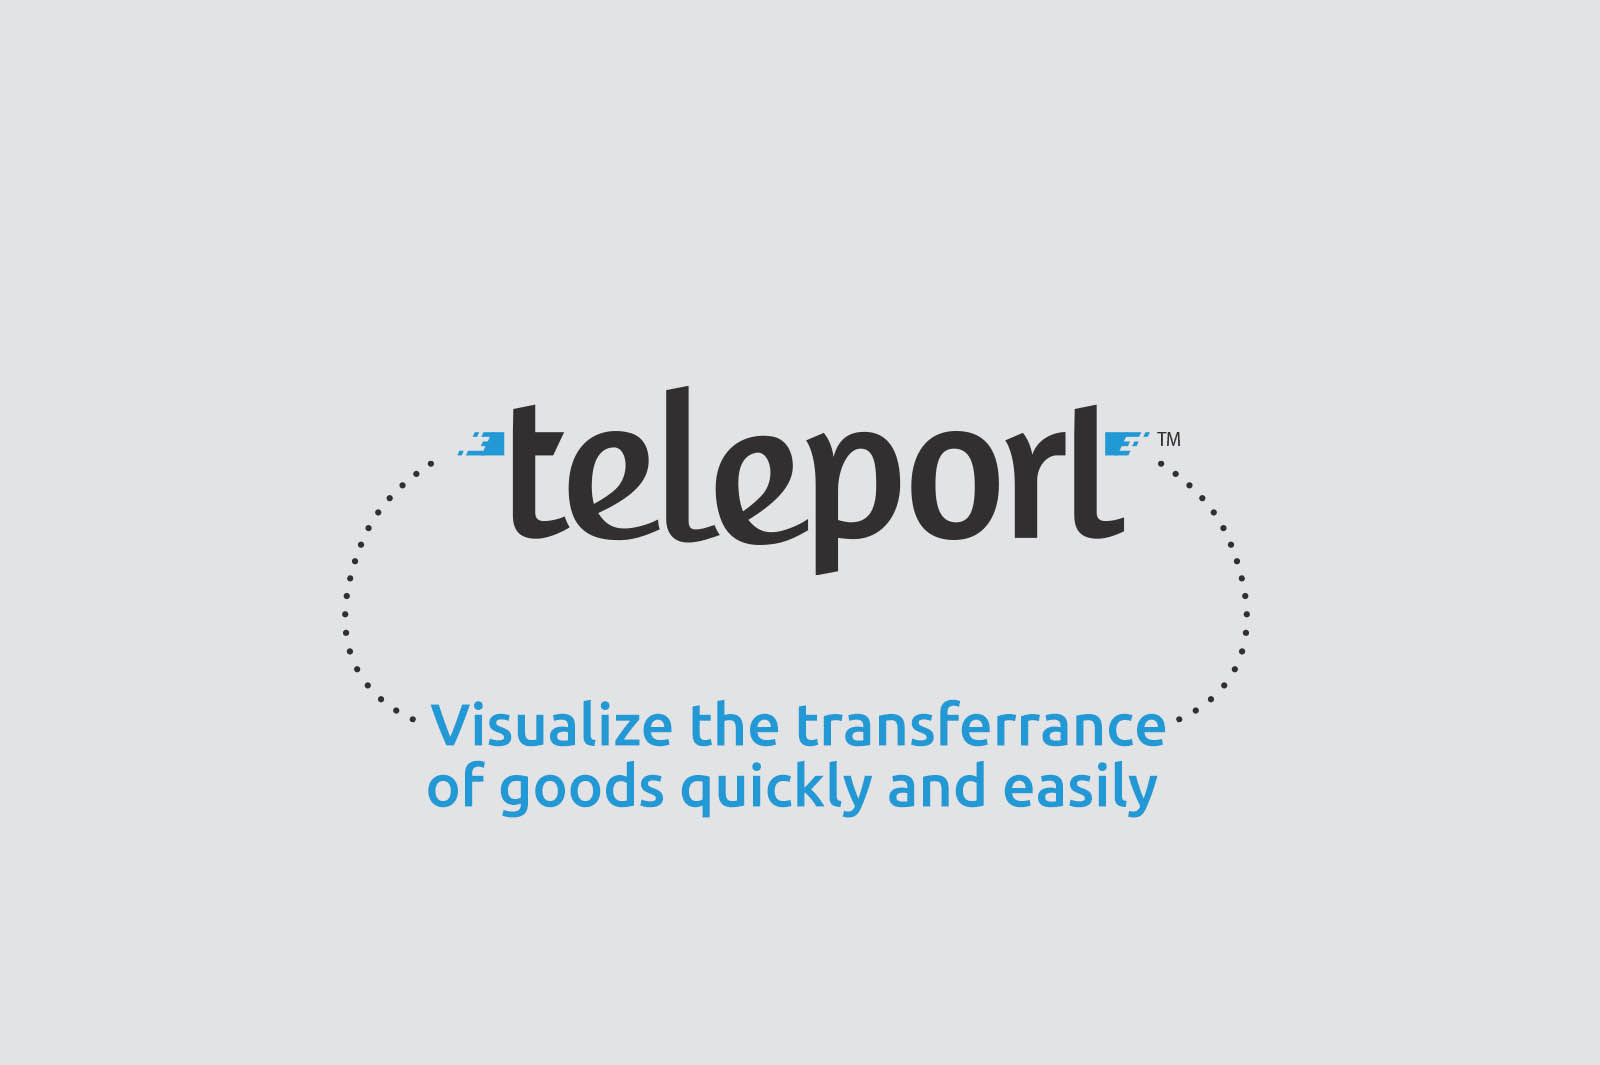 Teleport logo design - Transference of goods quickly and easily